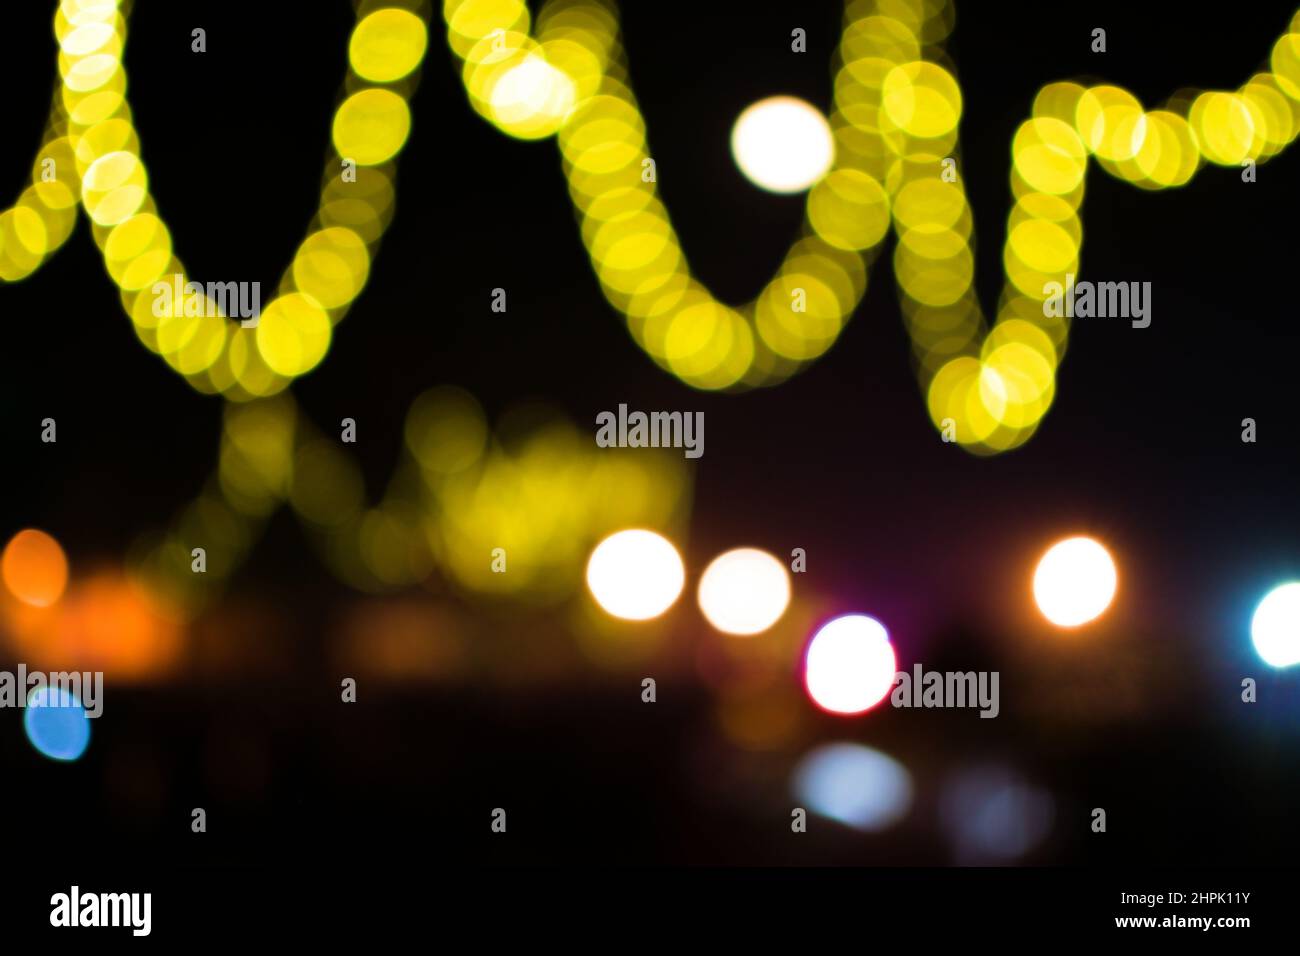 Bokeh light of yellow color in curved shapes with black background during special occasion of festival. Stock Photo